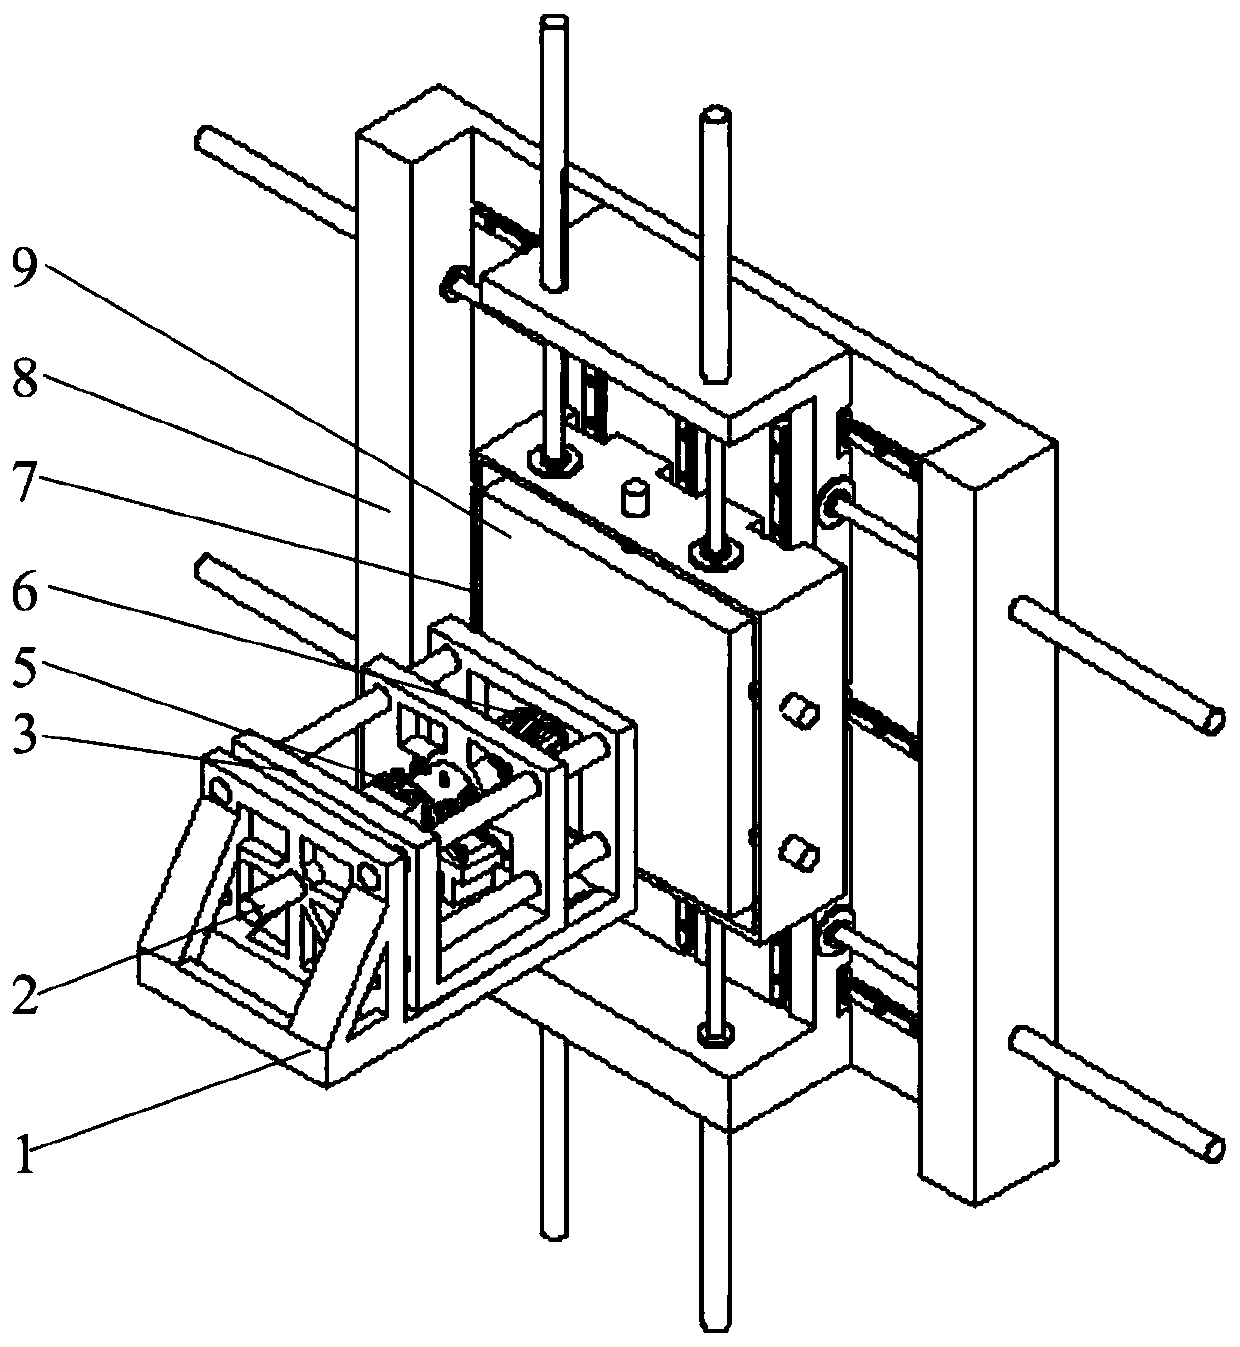 Test bed capable of simulating cutter behaviors at various positions of cutter head